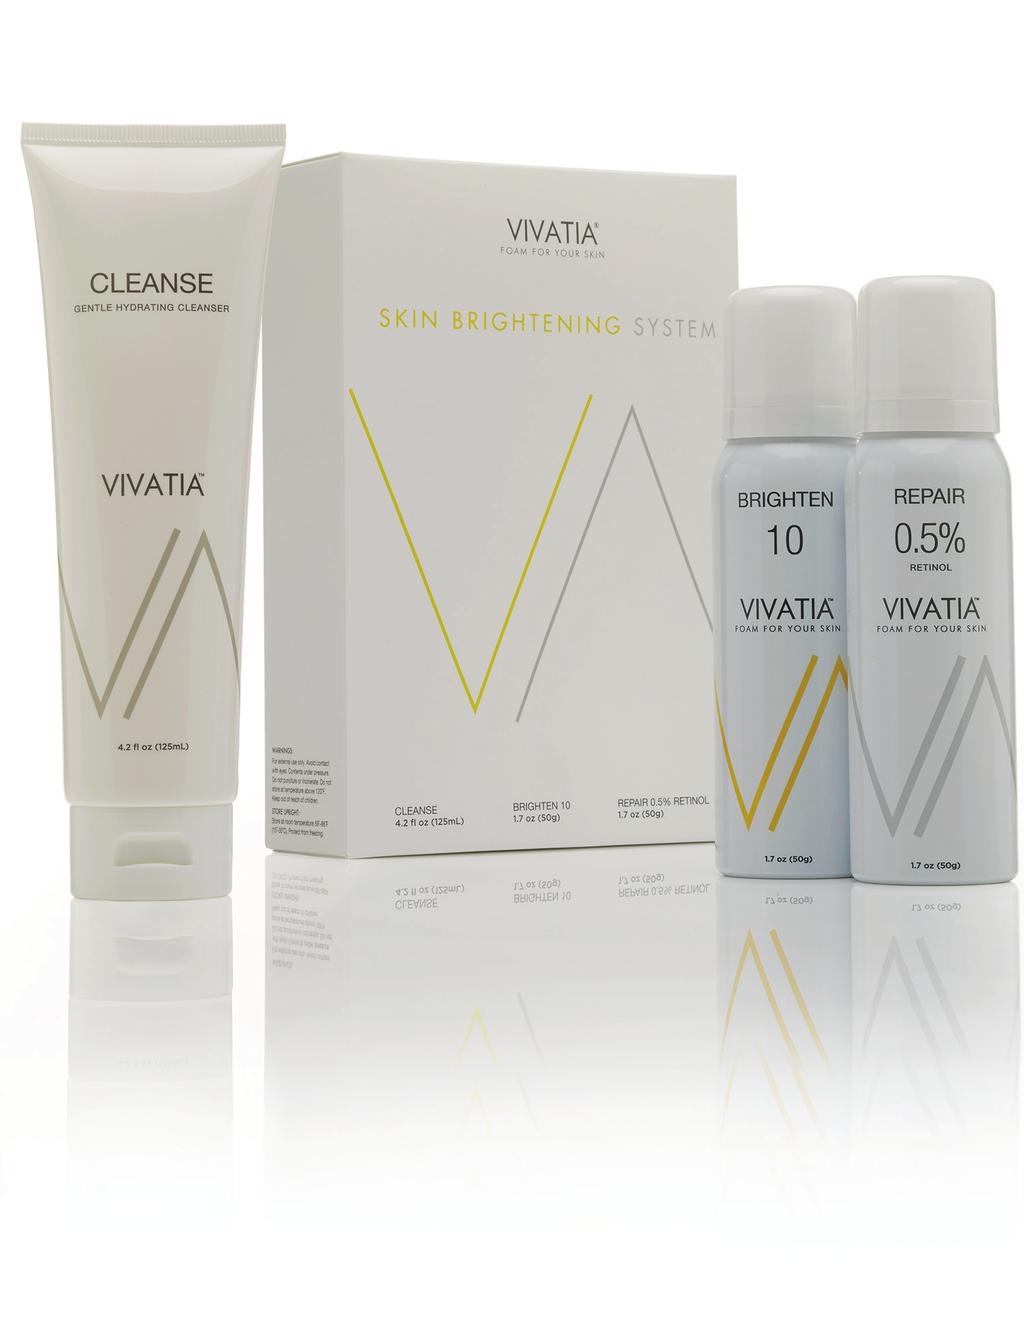 VIVATIA BRIGHTENING SYSTEM POWERFUL ANTI-AGING KEY AESTHETIC BENEFITS Vivatia s Foam Technology: Delivers highly concentrated levels of ingredients in an elegant formula designed to be safe and